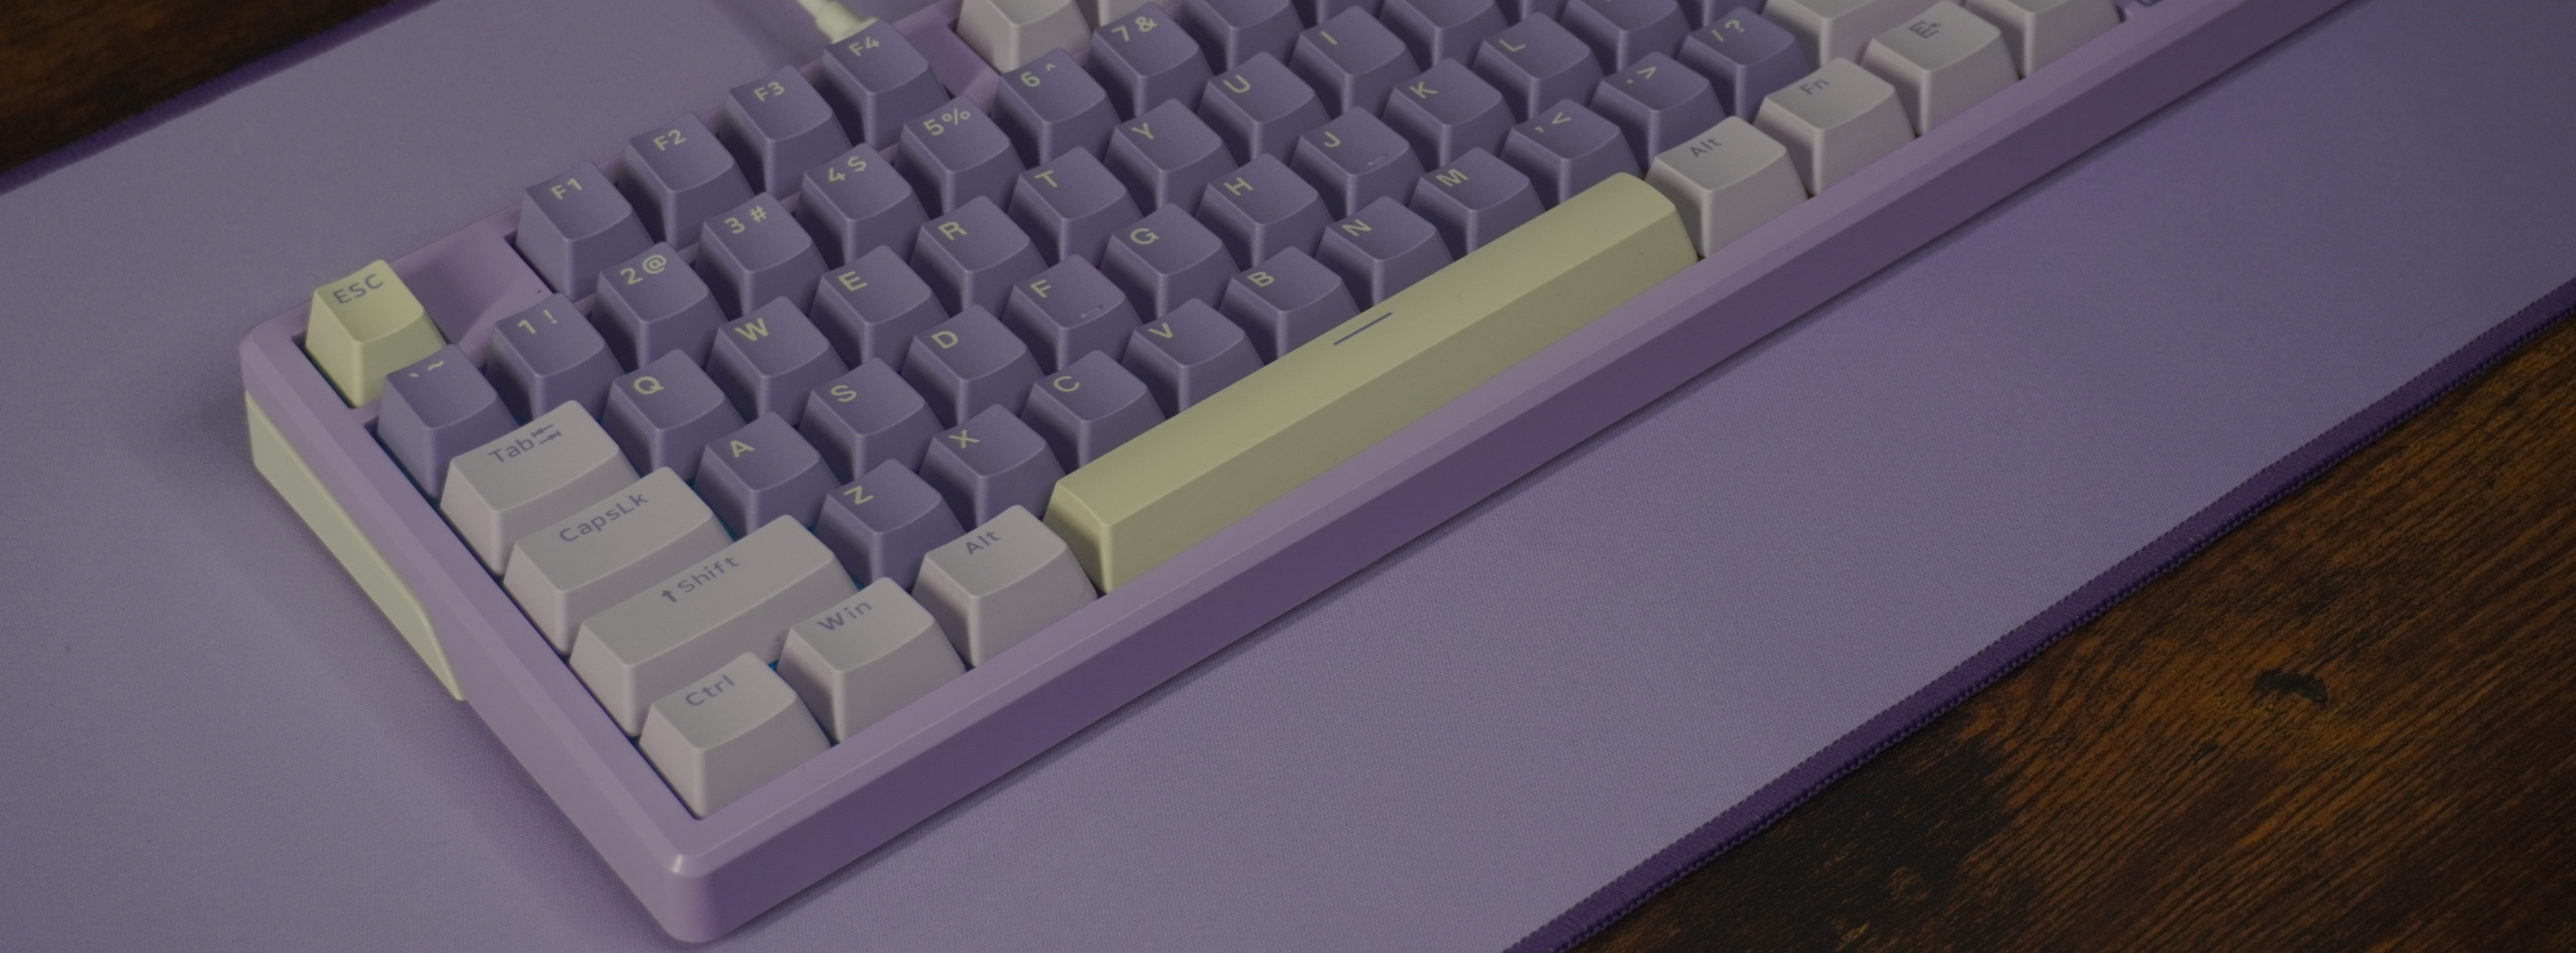 This is a Photo of our What The Thock Gomu87 TKL purple variant mechanical keyboard on a desk with a purple desk mat, taken from above on a 45degree angle